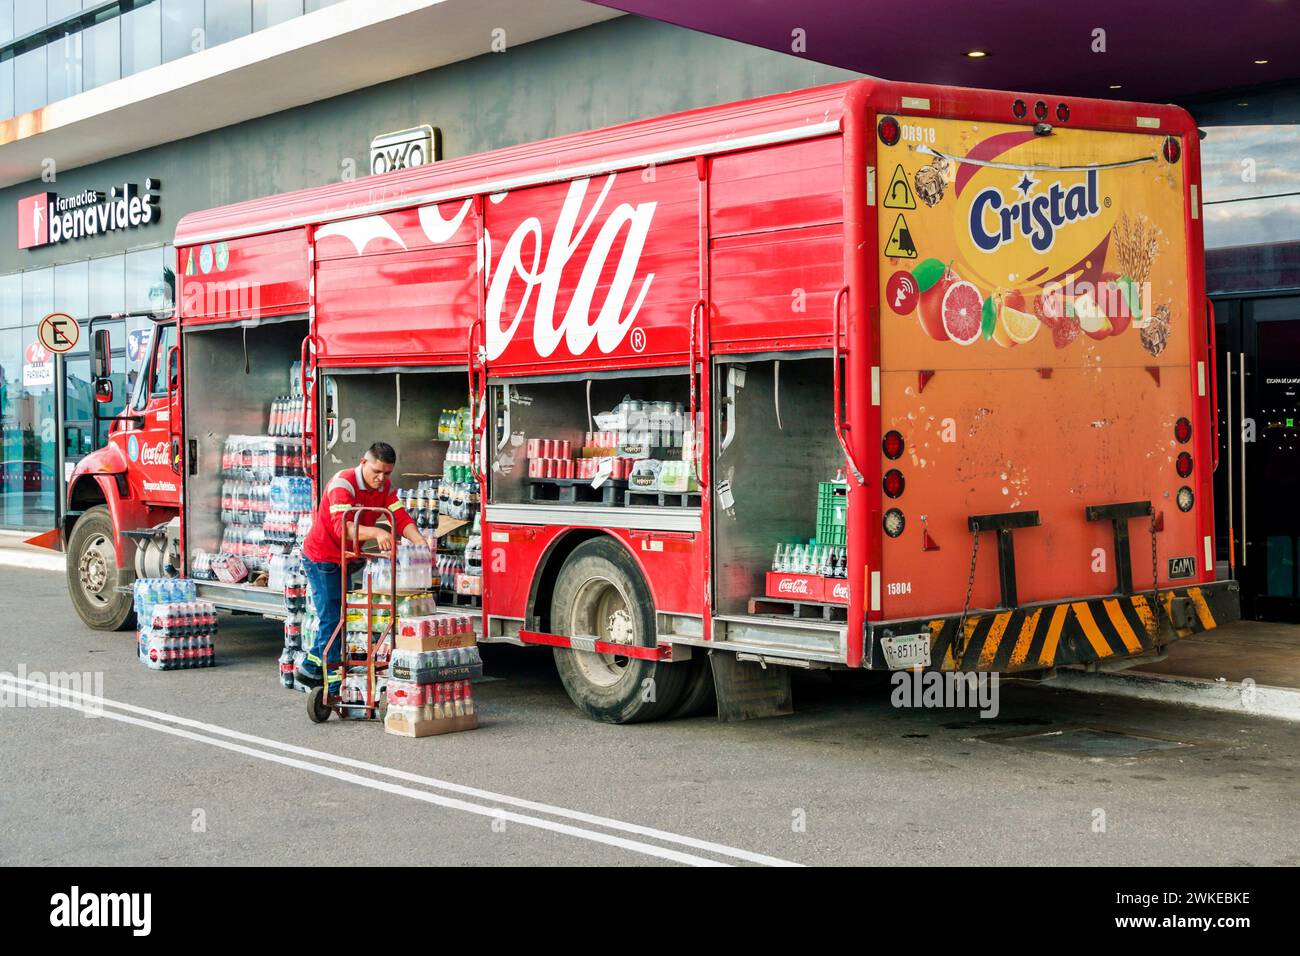 Merida Mexico,Zona Industrial,Galerias Merida shopping mall,outside exterior,Coke Cocca-Cola delivery truck,man men male,adult adults,resident residen Stock Photo